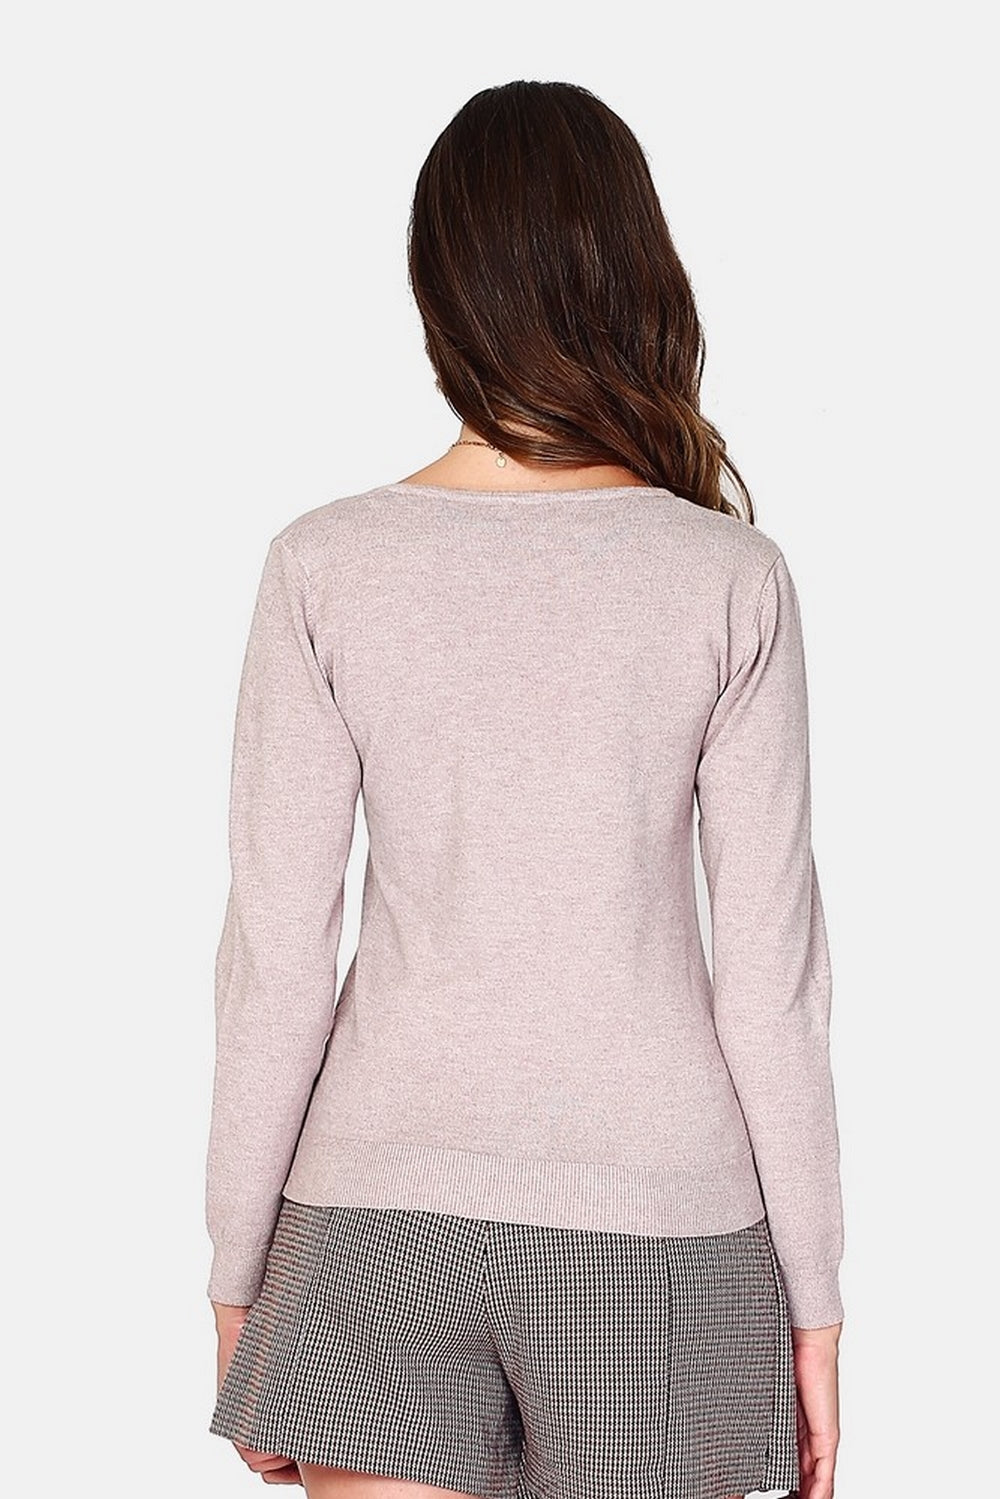 Classic 3-ply knit V-neck sweater with long sleeves